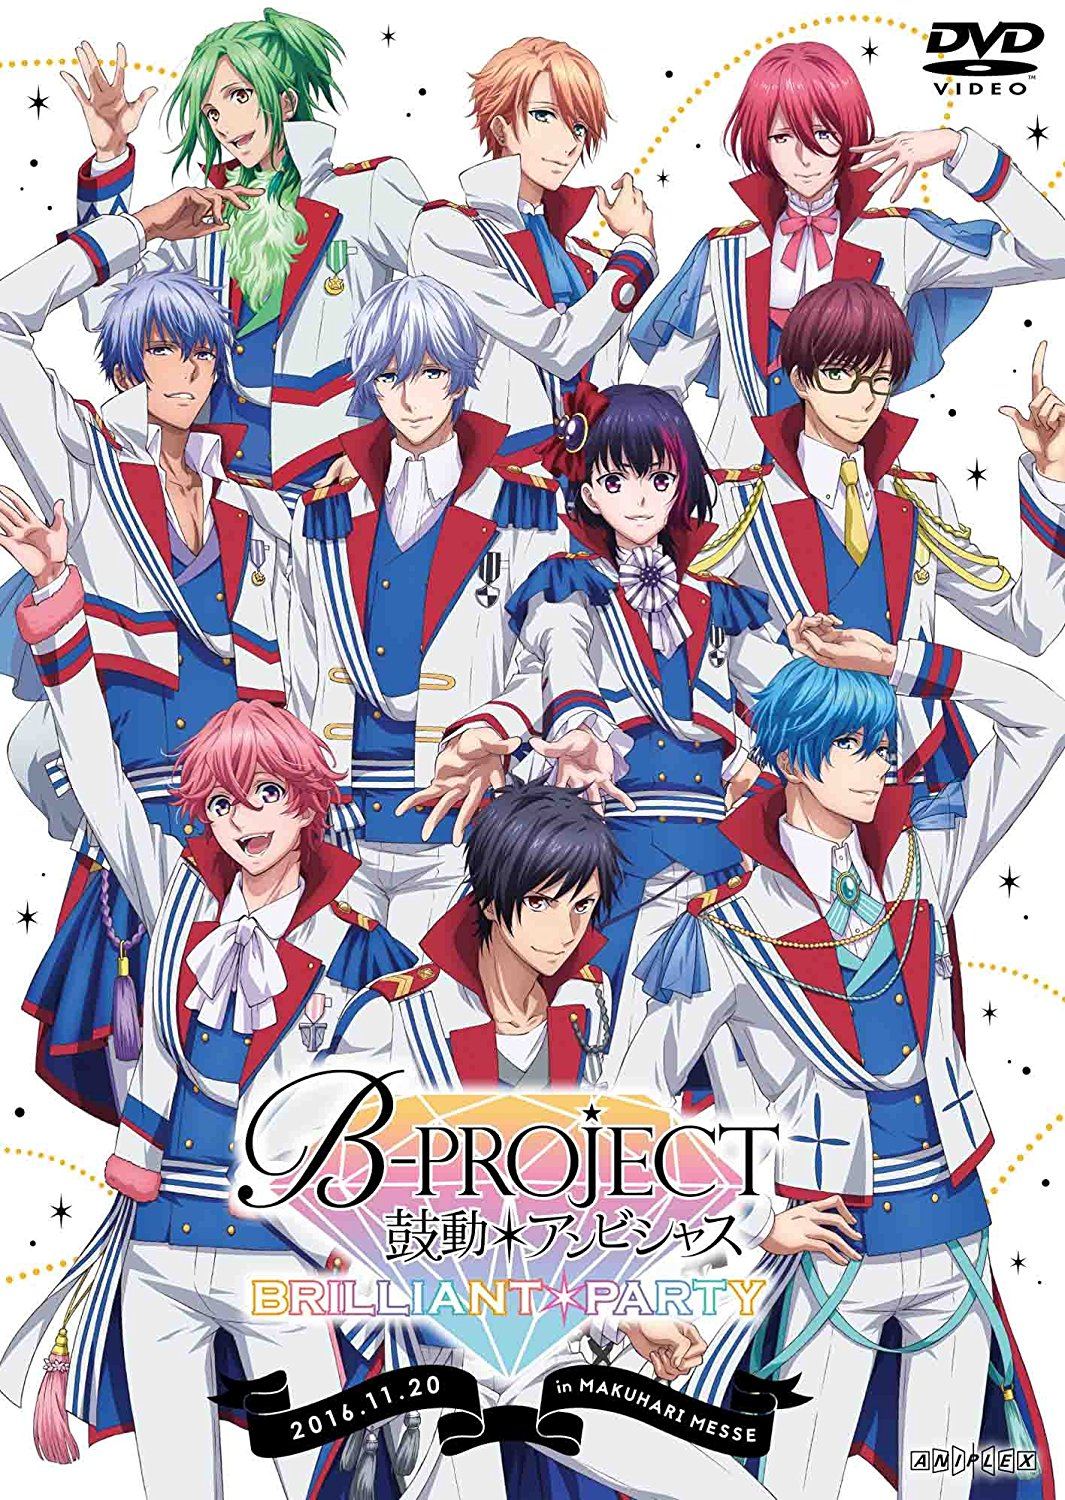 B Project Kodo Ambitious Brilliant Party